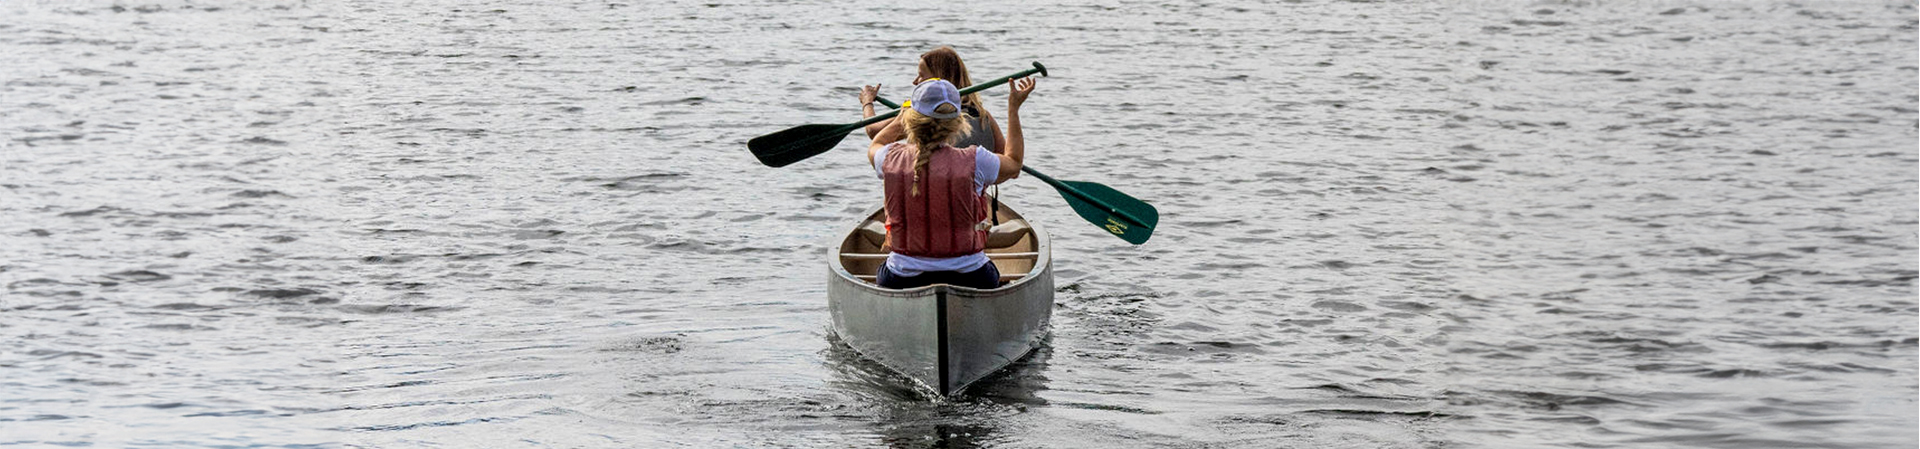  two women canoeing on Lake Brimhall 